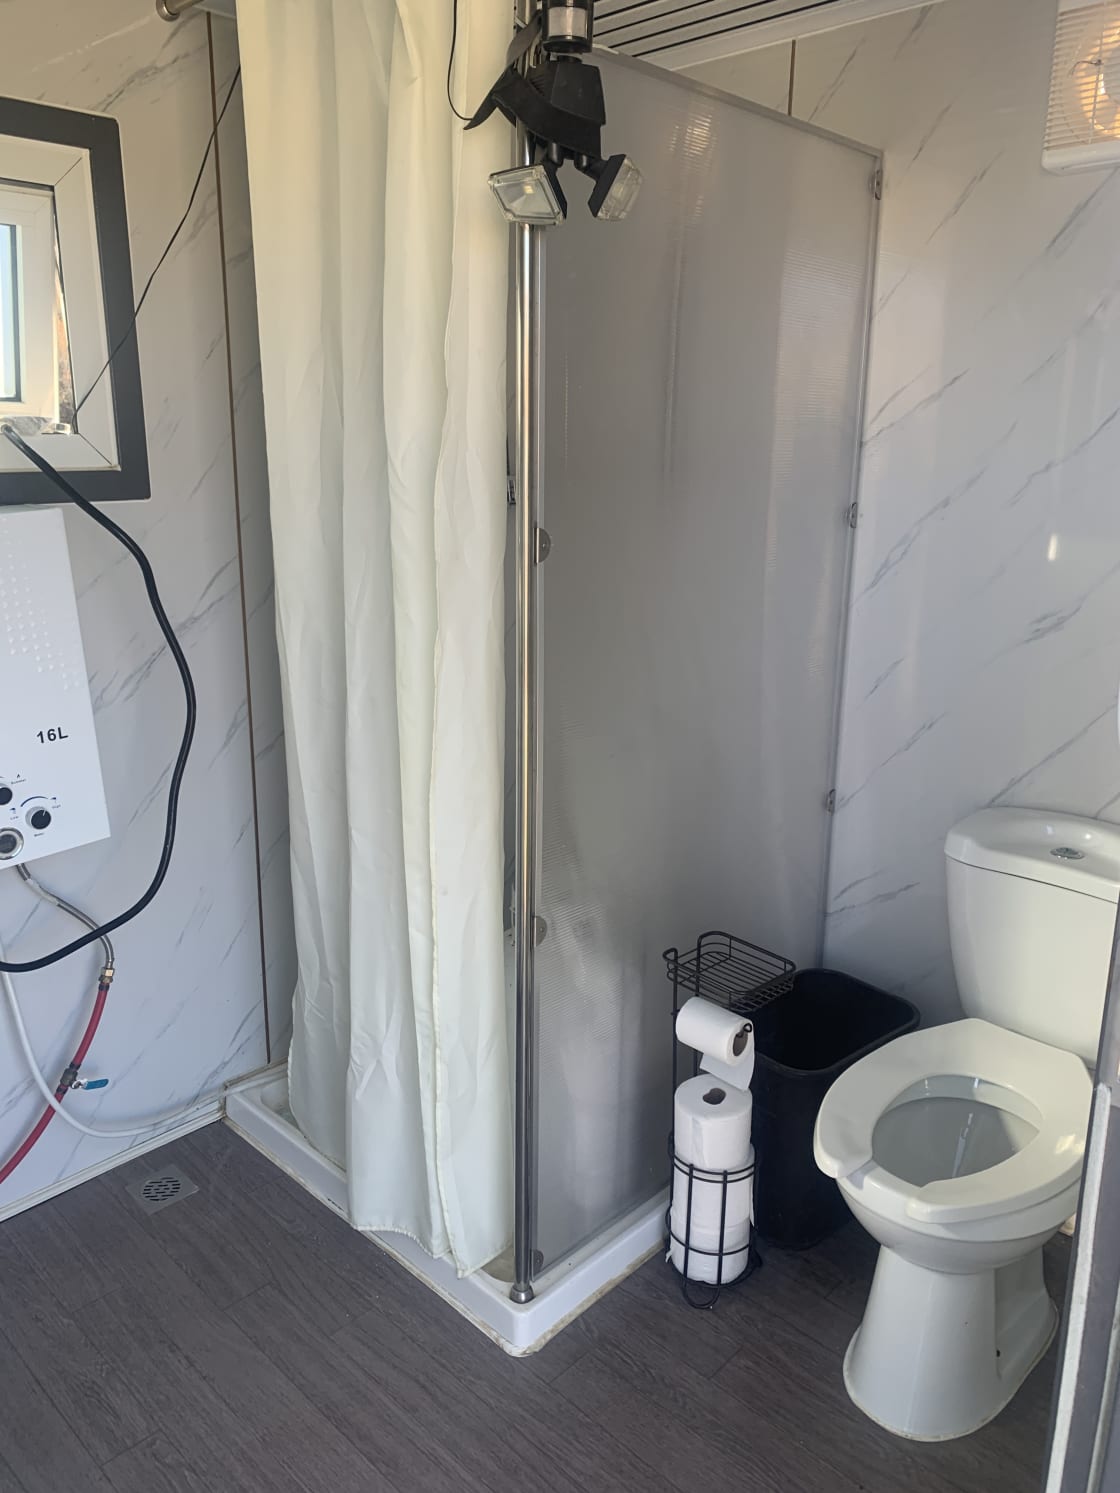 Flushing toilet and instant hot water shower stall